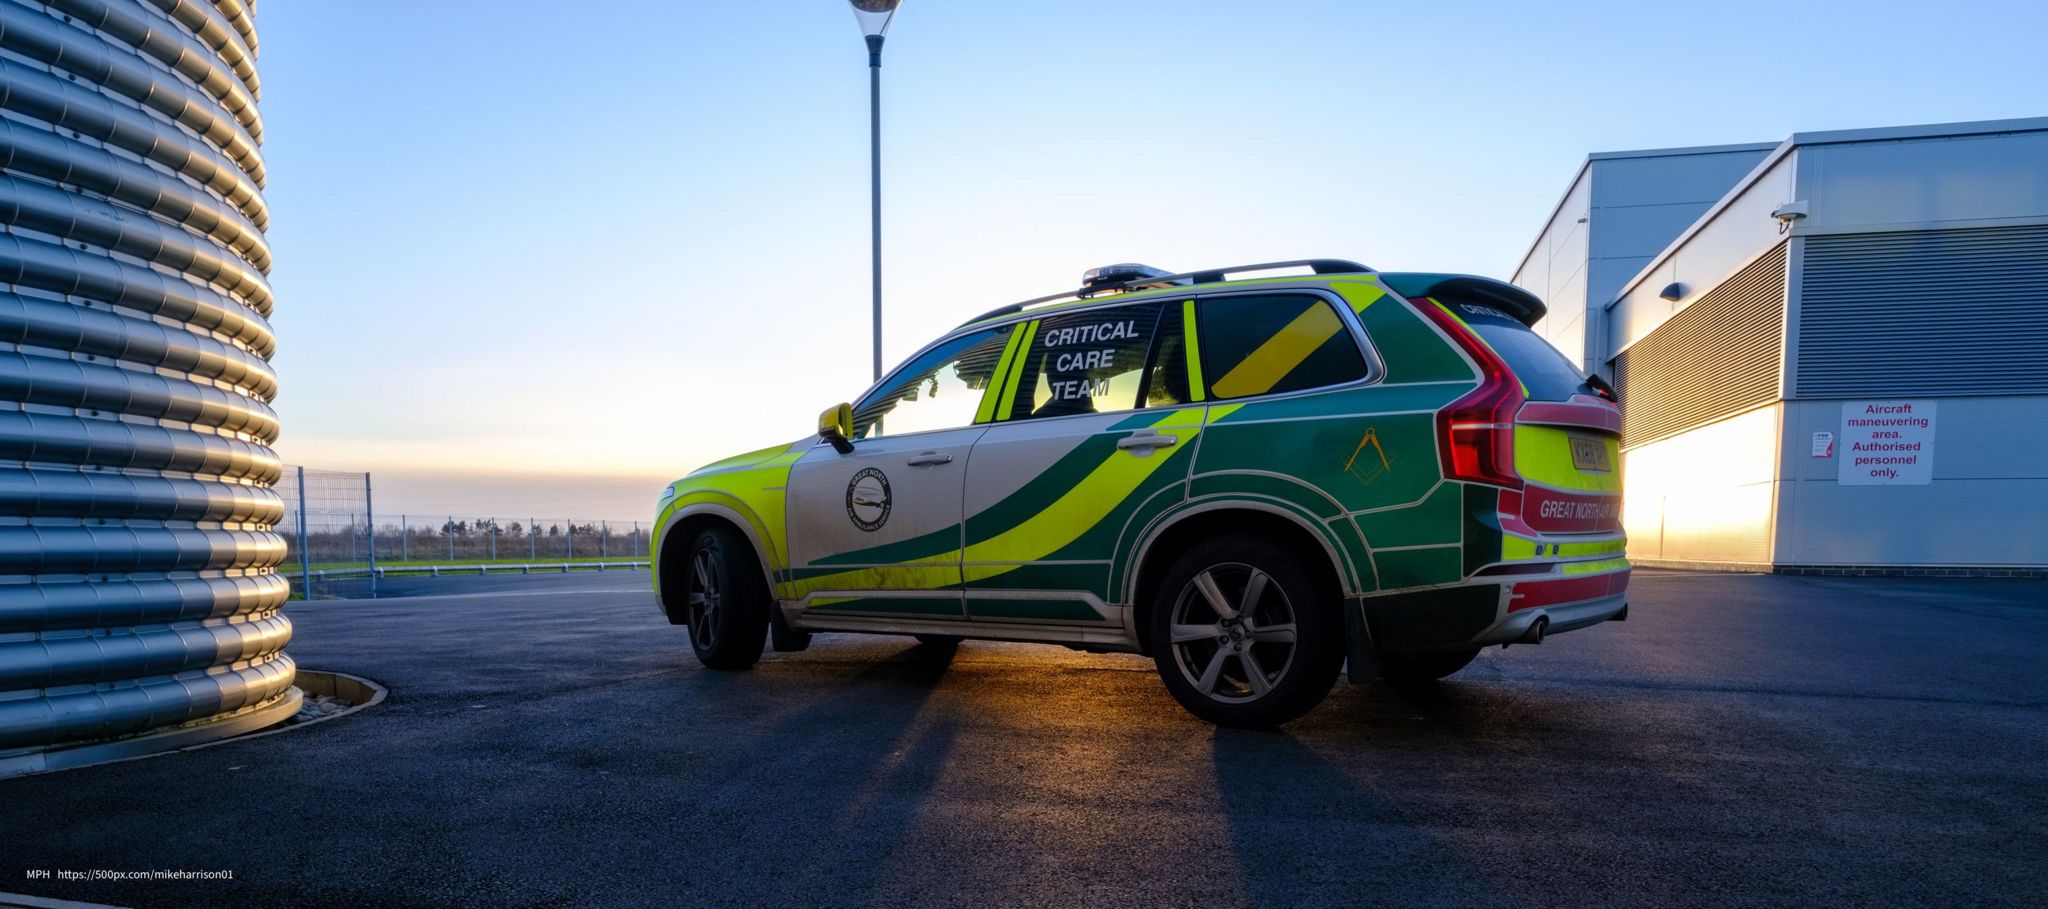 An image of a critical care team vehicle